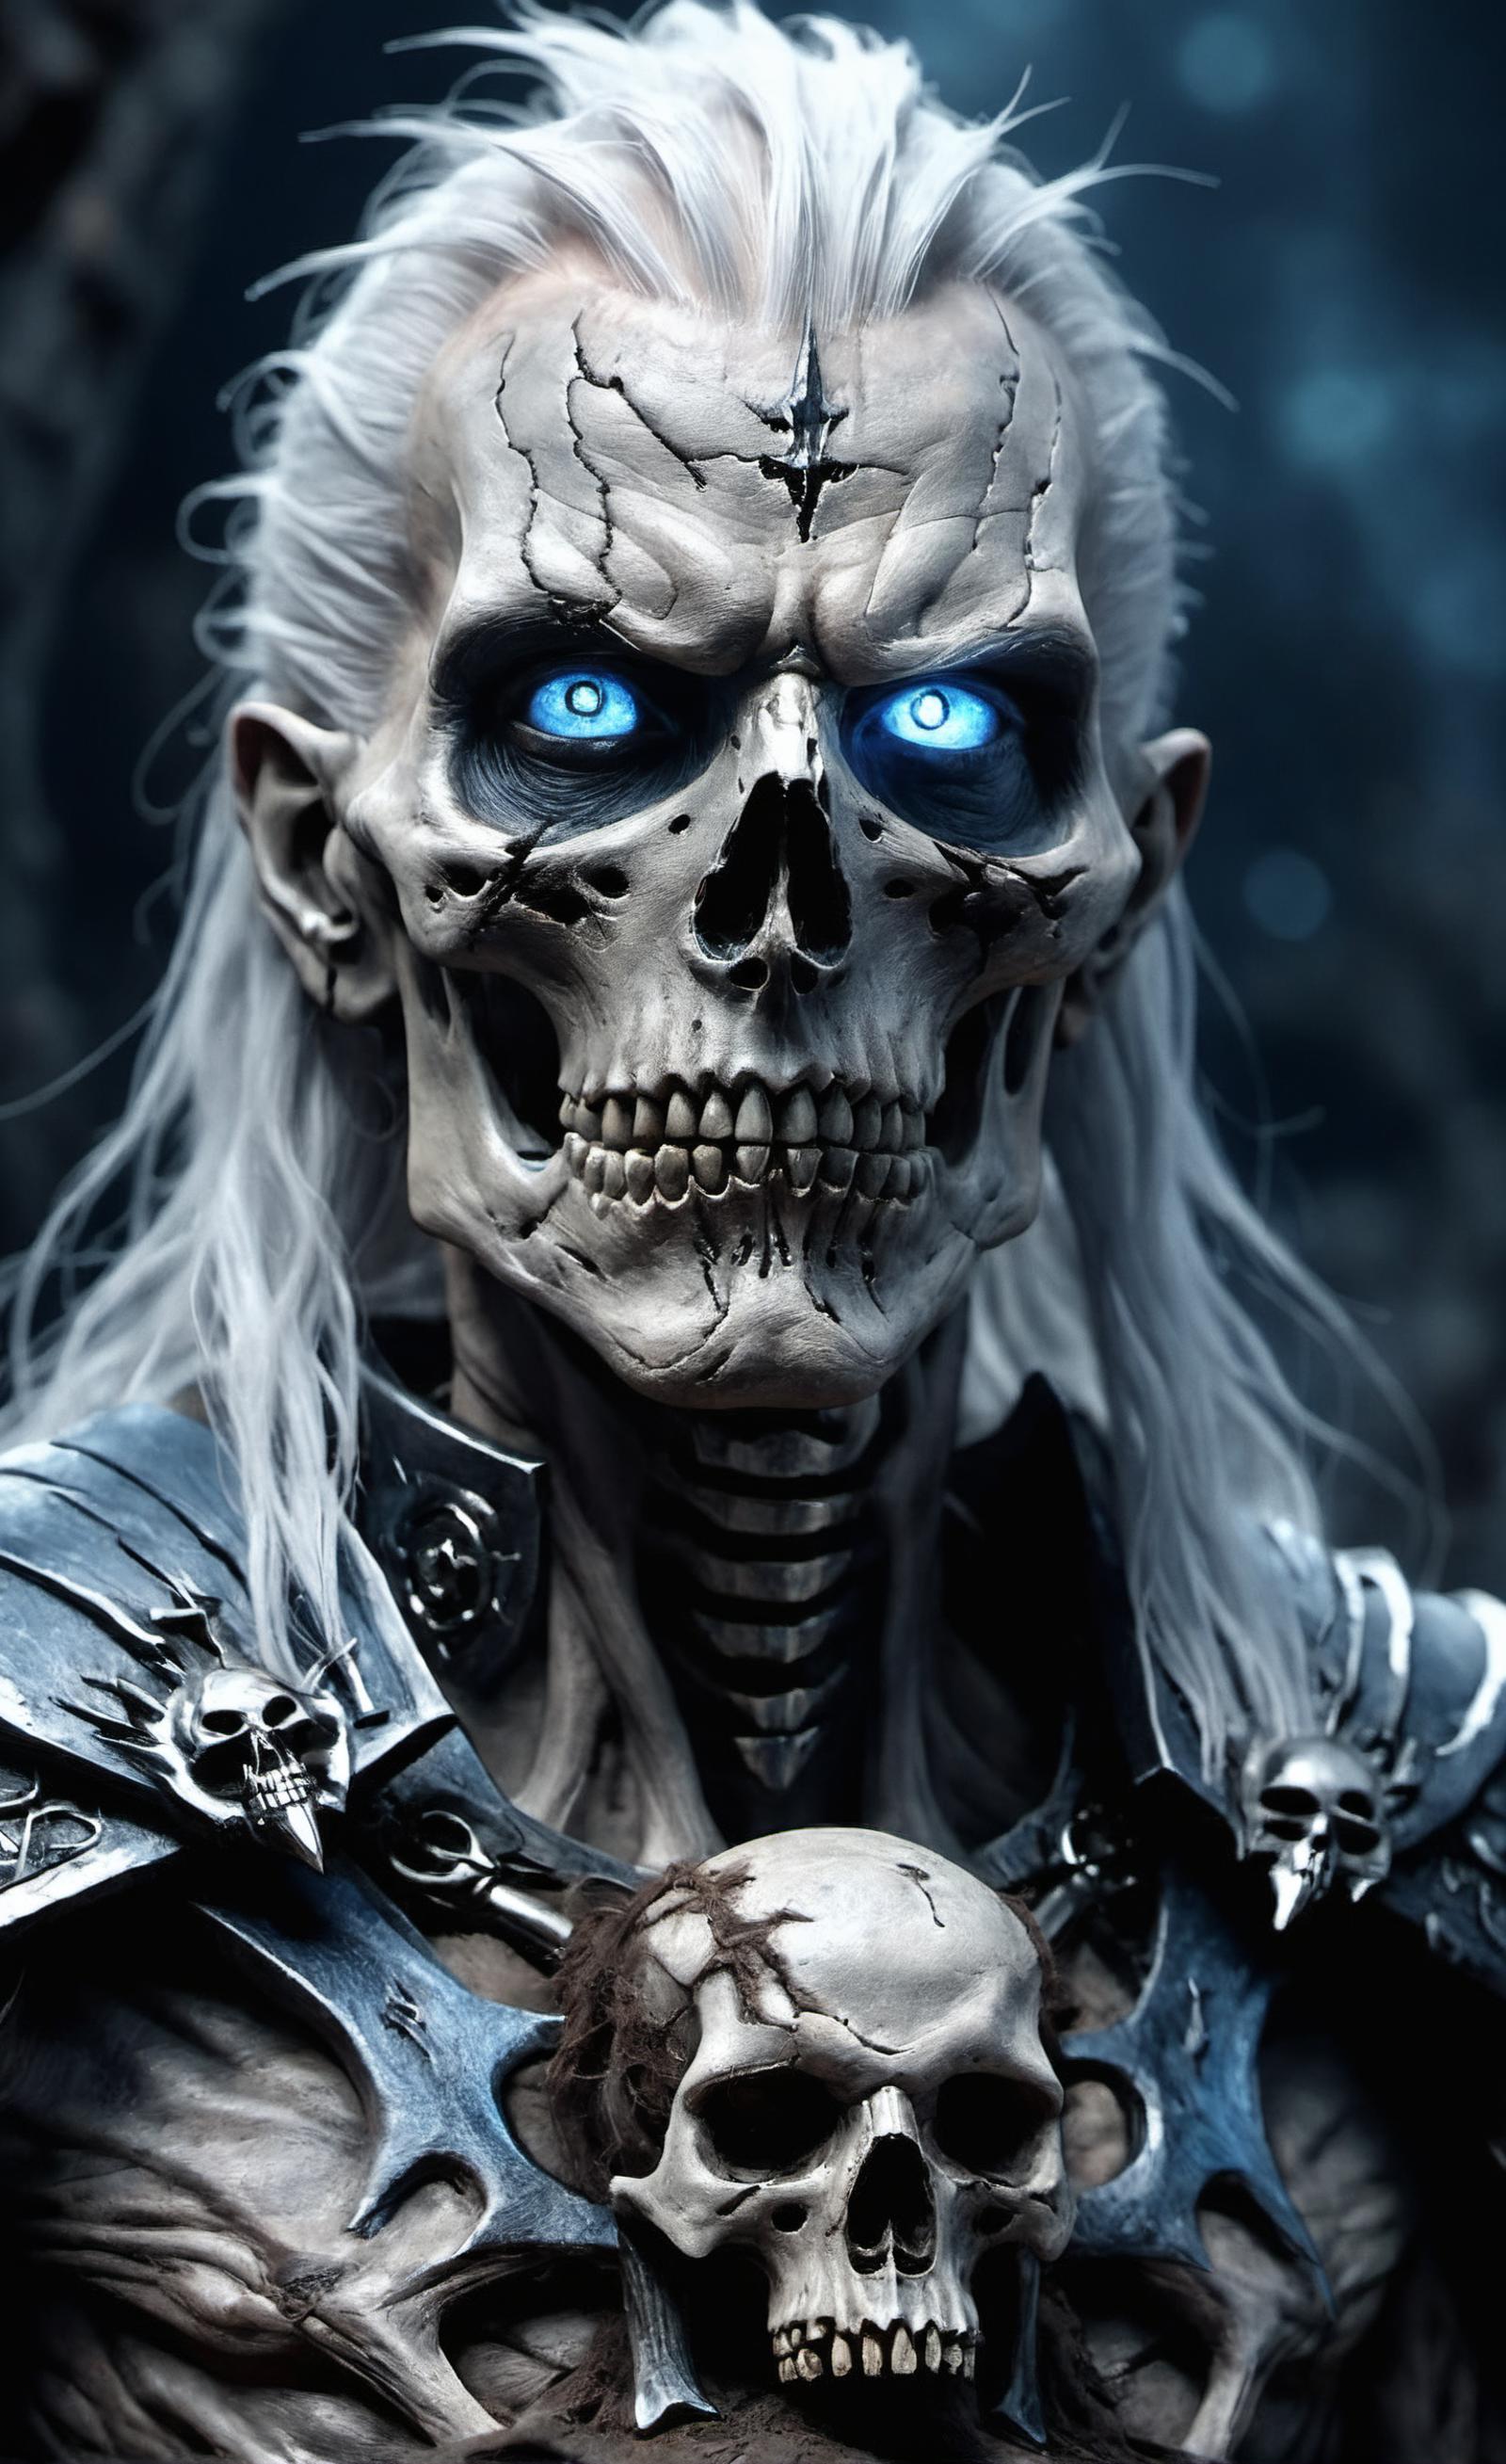 Ancient-looking skeleton with blue eyes and silver armor.